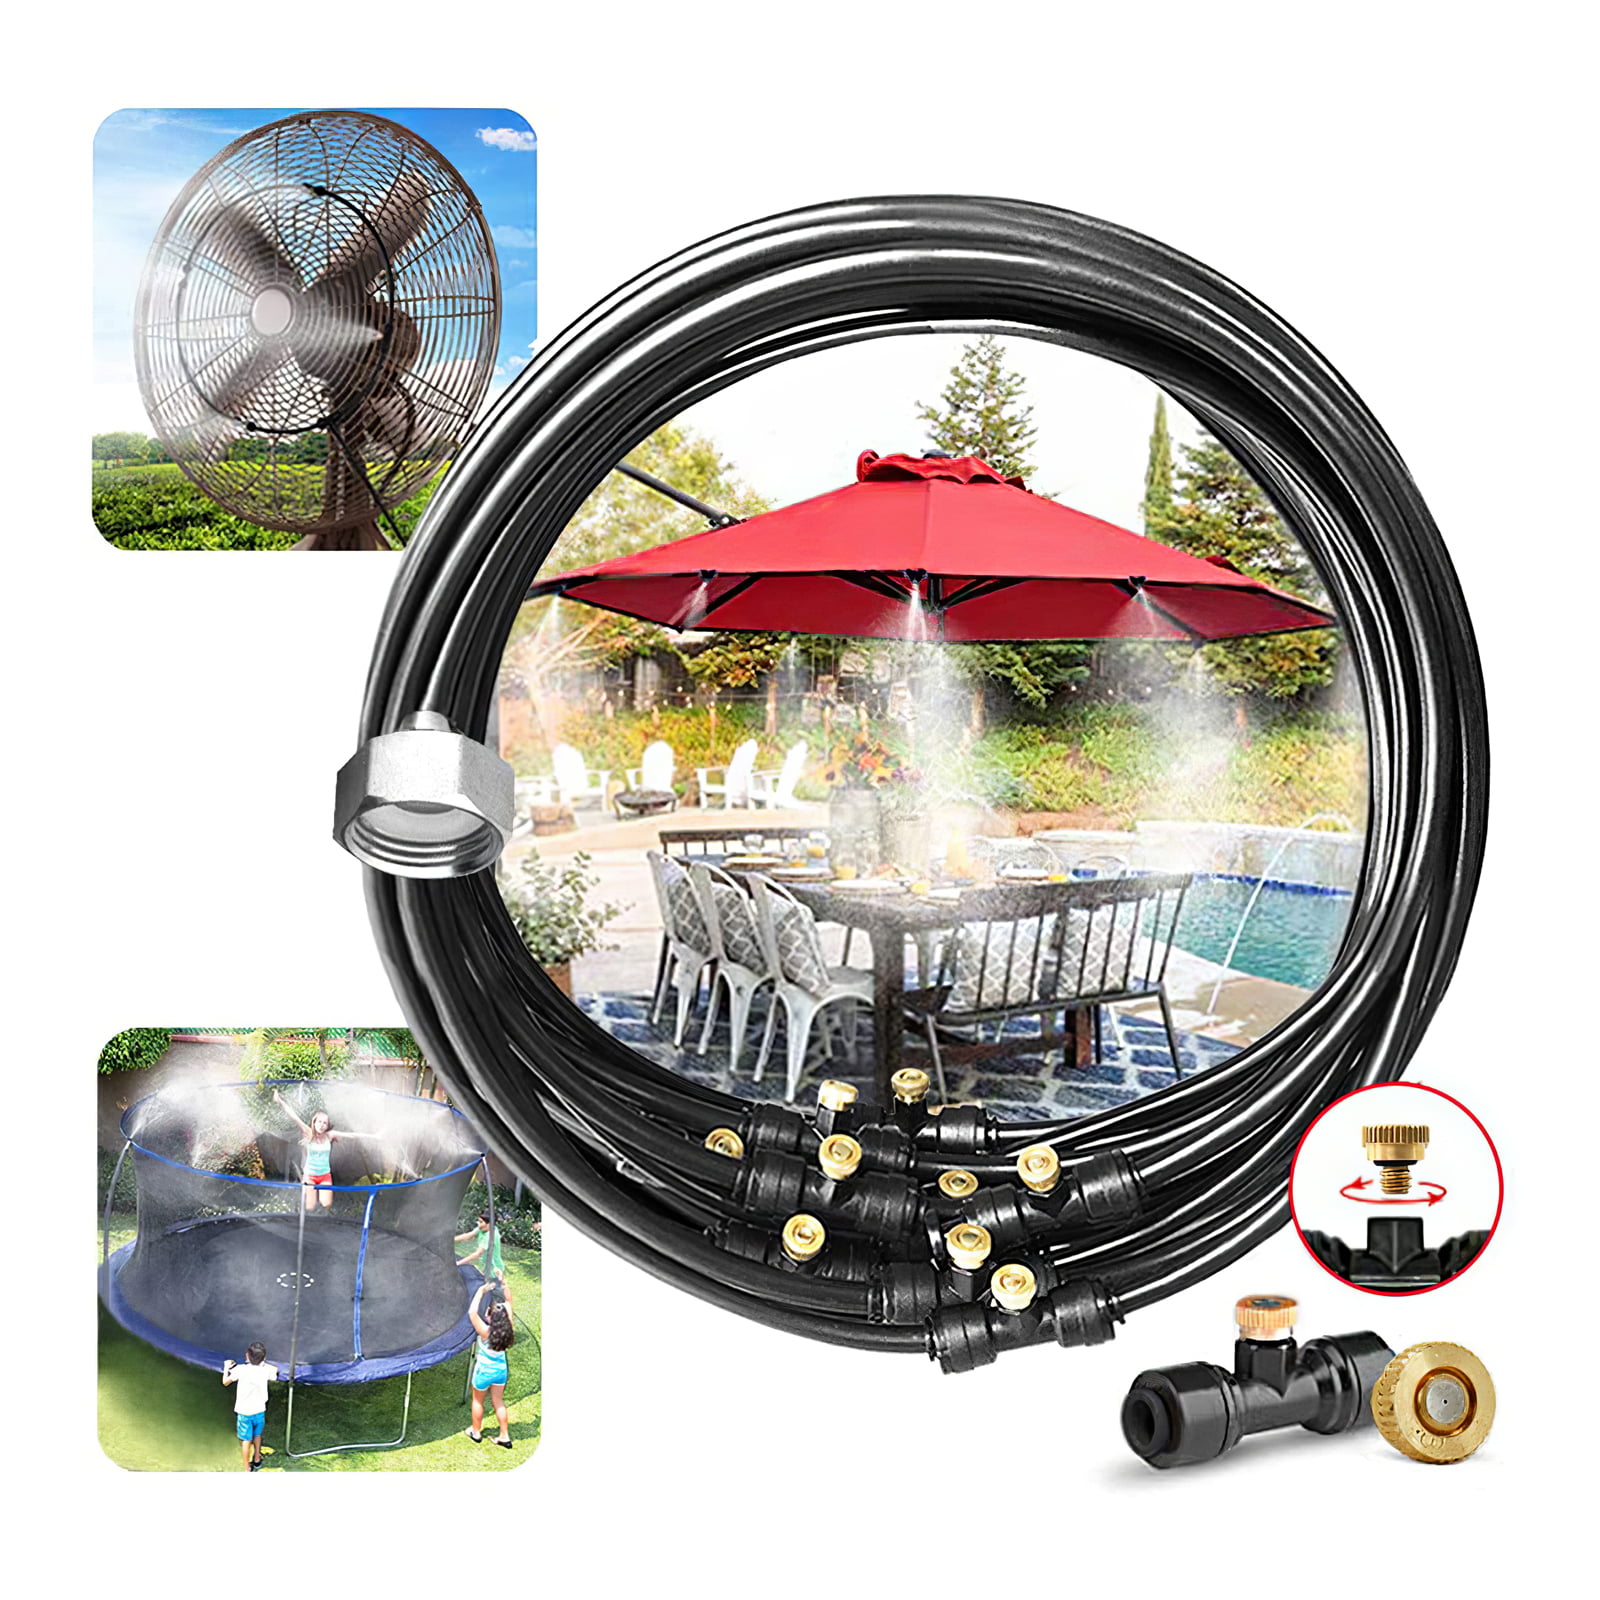 3m Water Supply Misting System Fan Cooler Water Cooling Patio Mist Garden Kit 